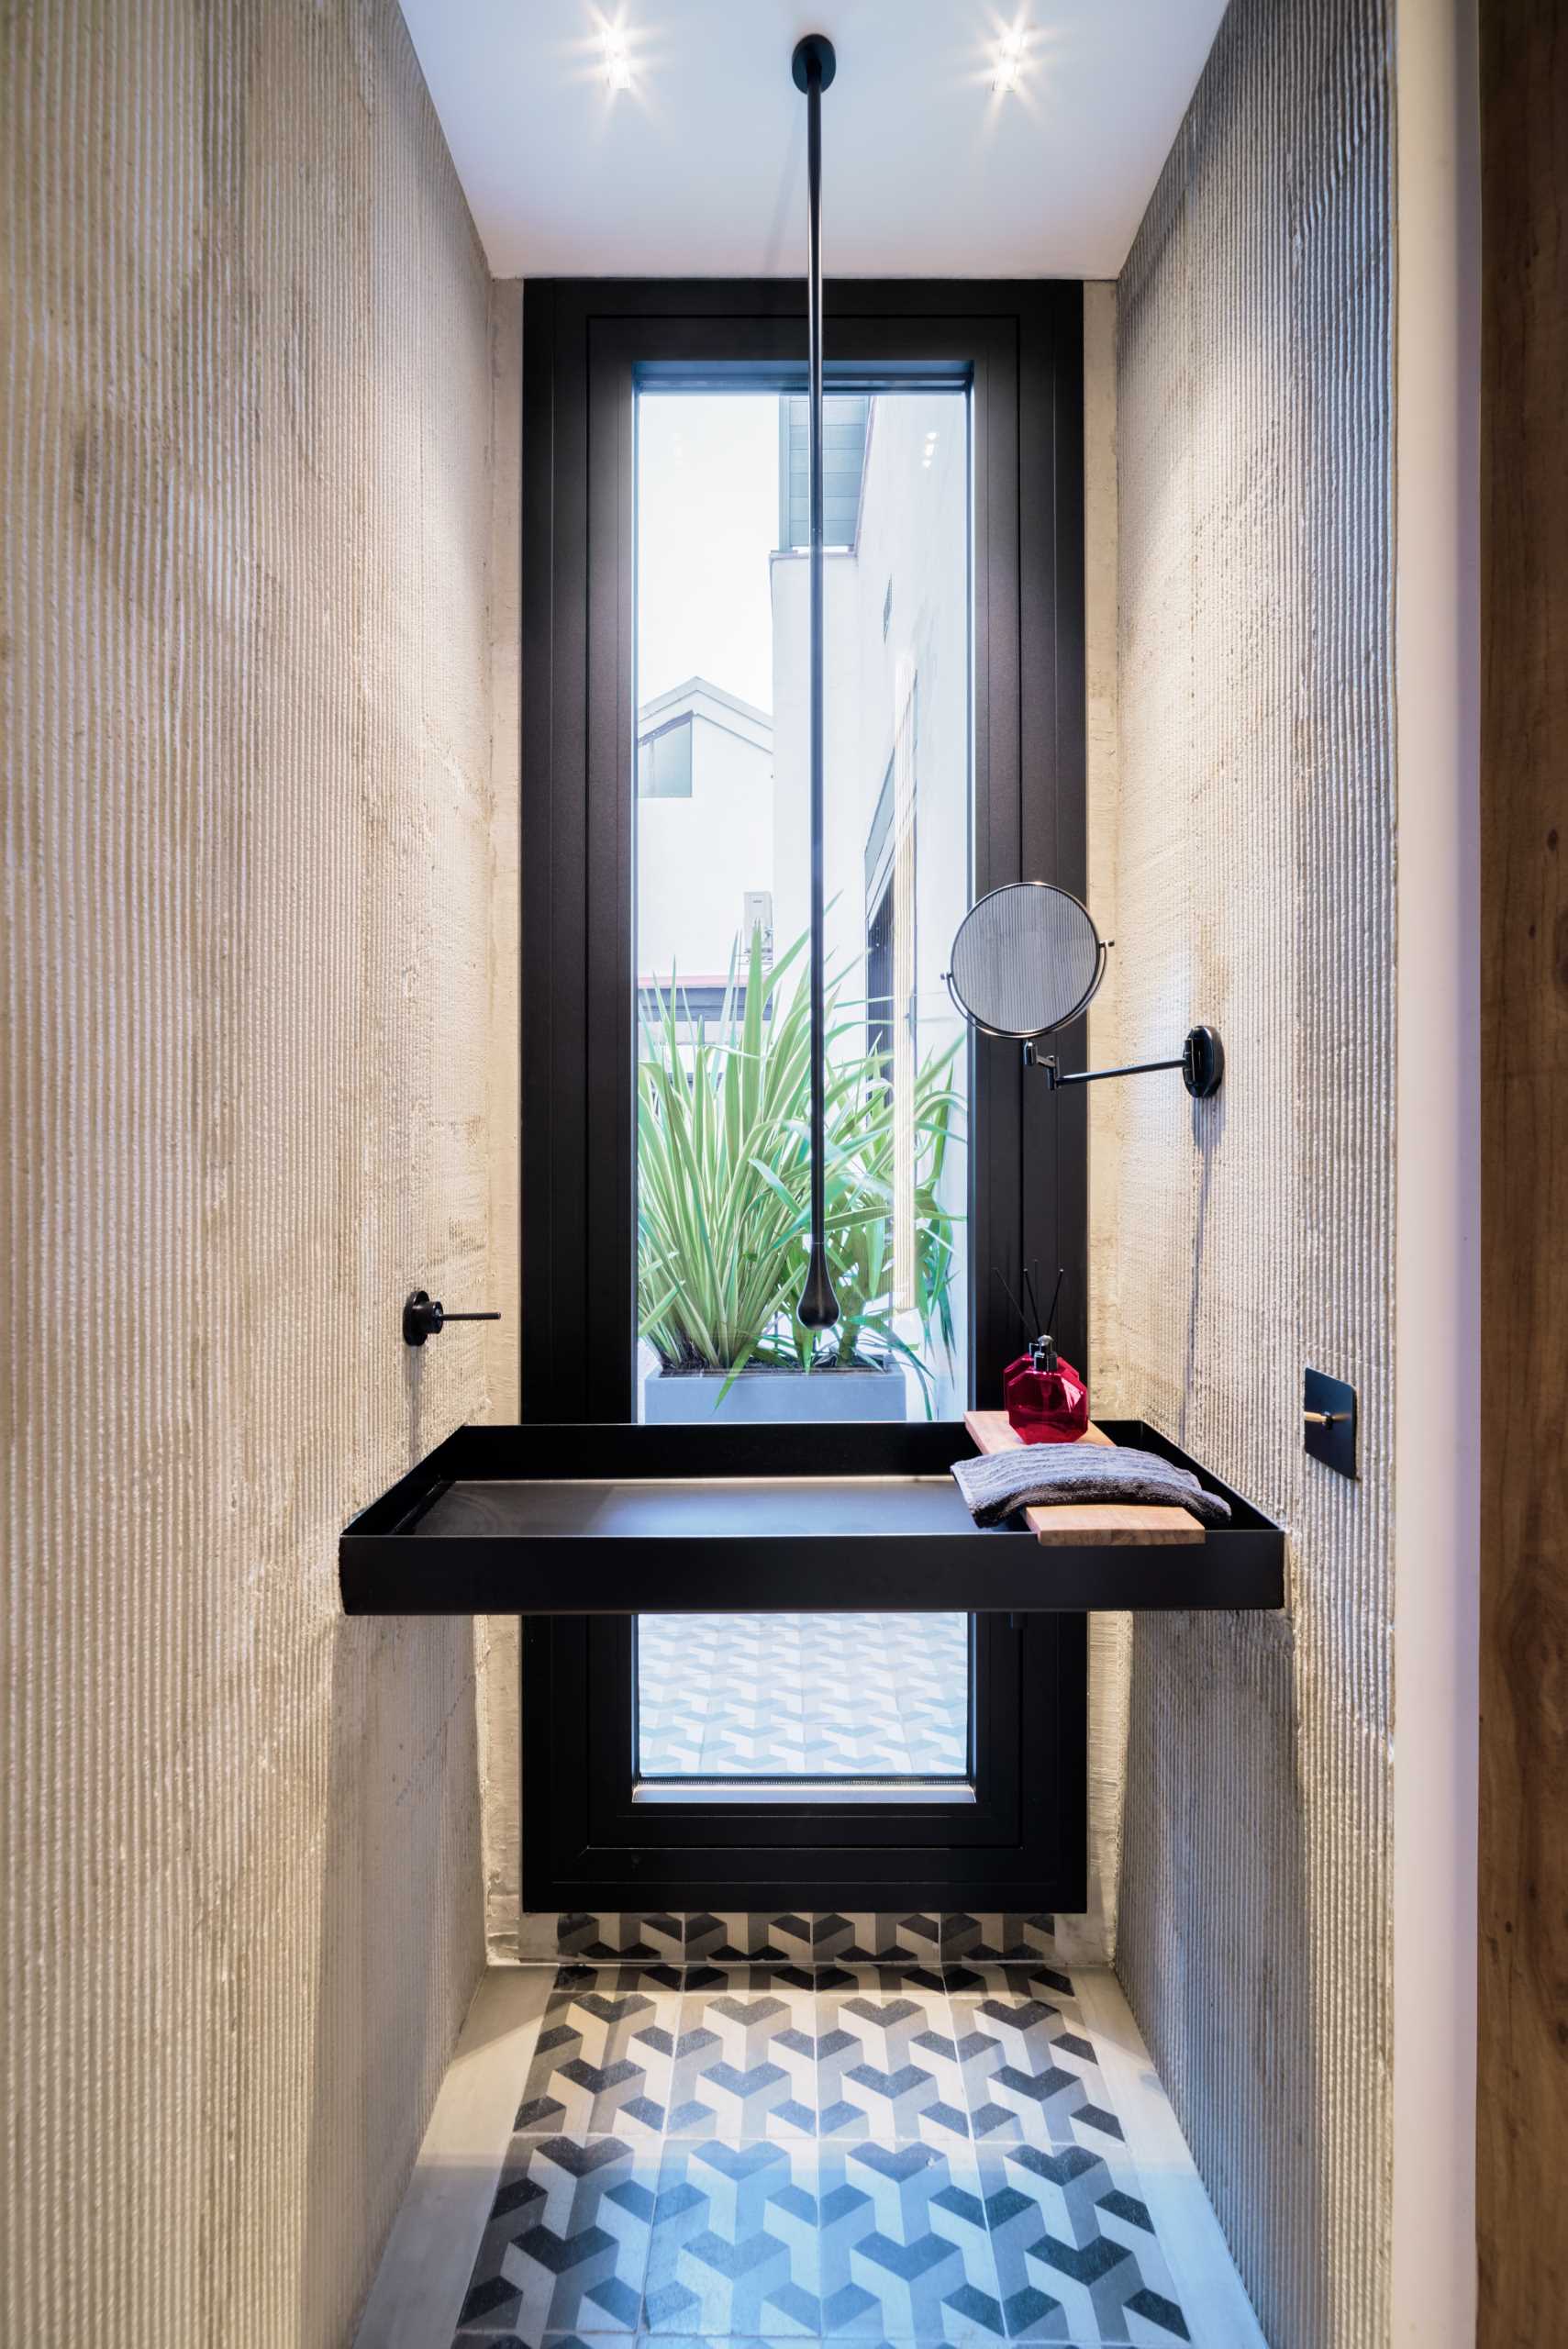 In this bathroom, a minimalist vanity spans the distance between the walls.